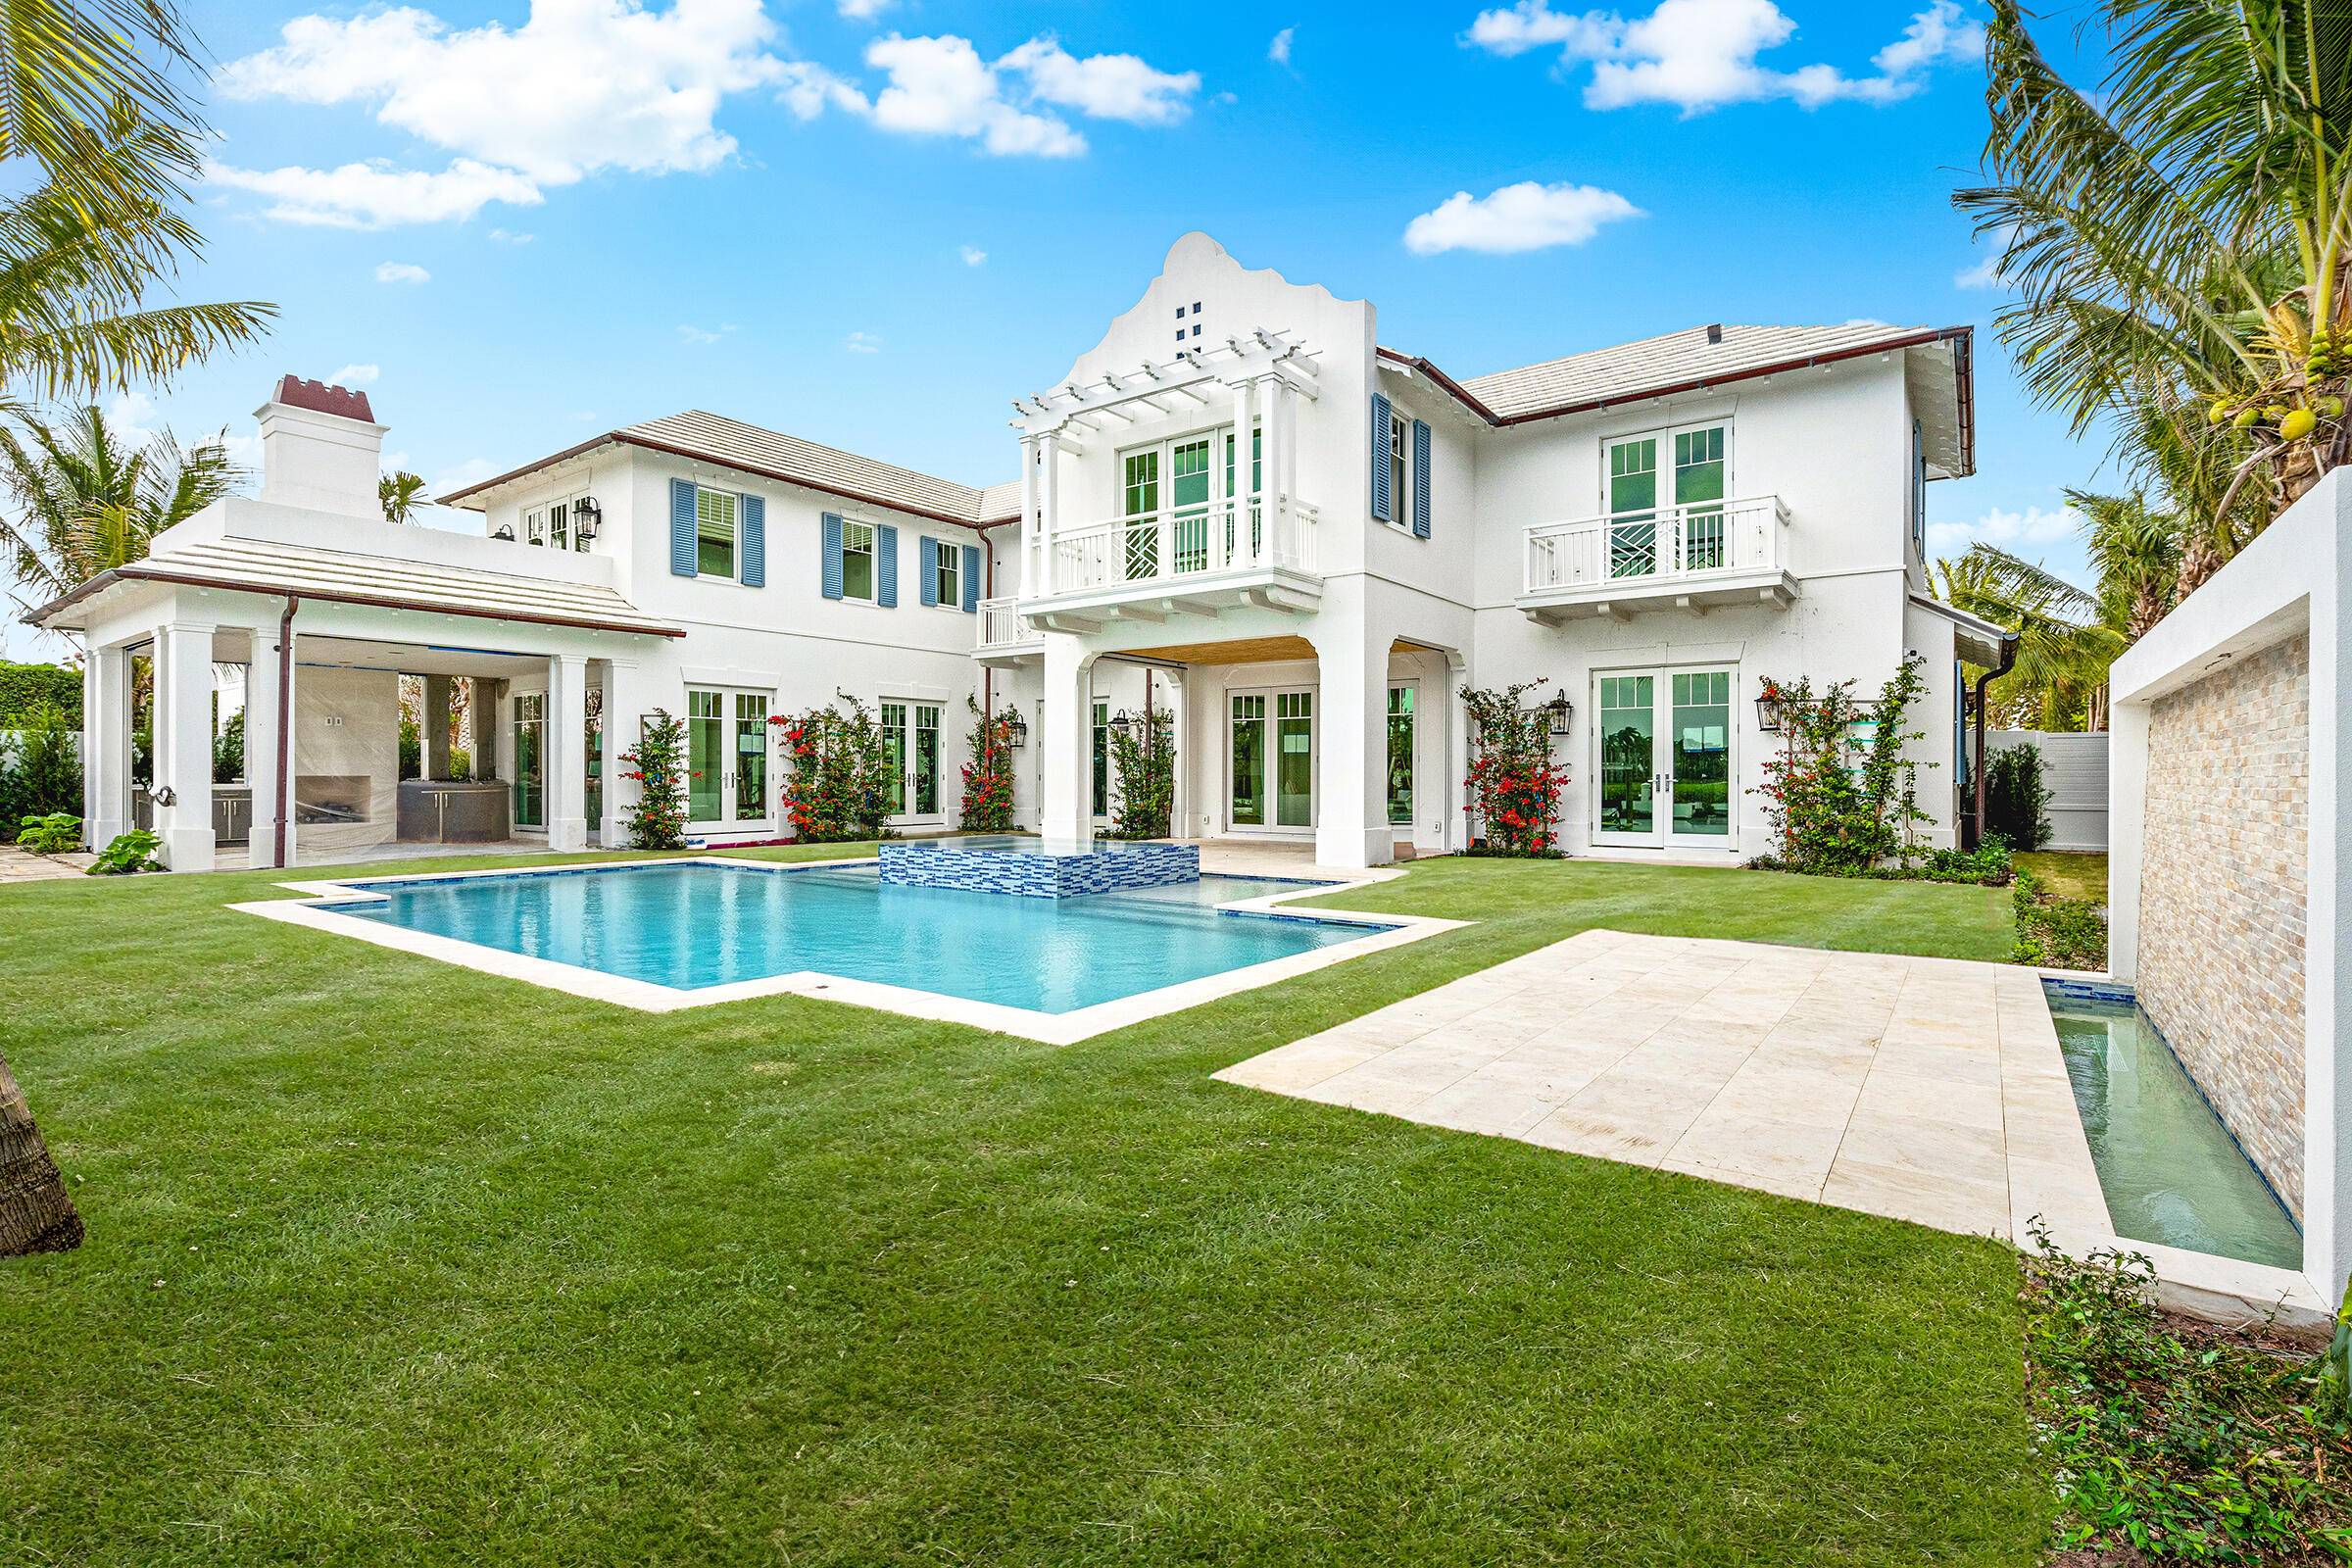 Welcome to 584 Island Drive, the premier newly built home available on Everglades Island in Palm Beach.